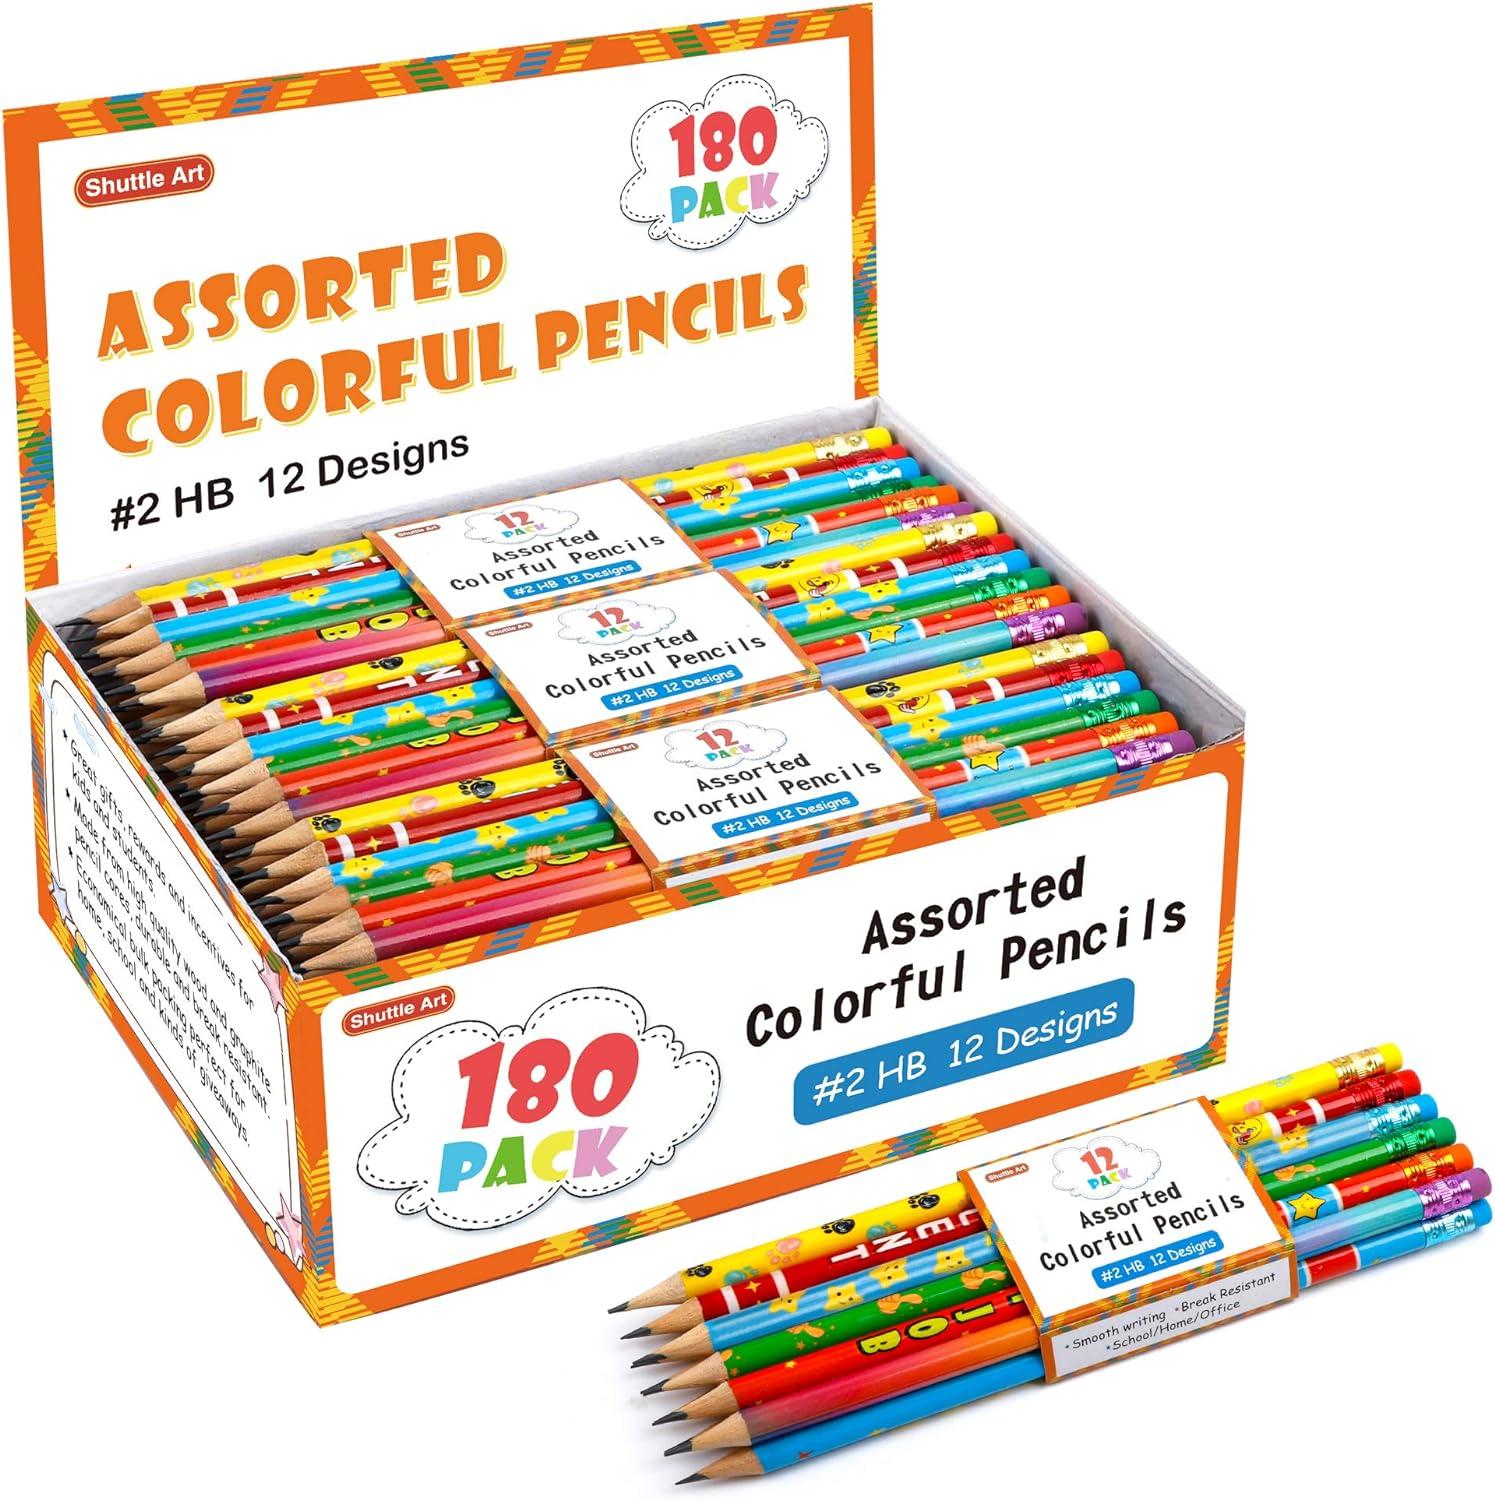 assorted colorful pencils shuttle art 180 pack kids pencils bulk with 12 designs 2 hb pre-sharpened awards 